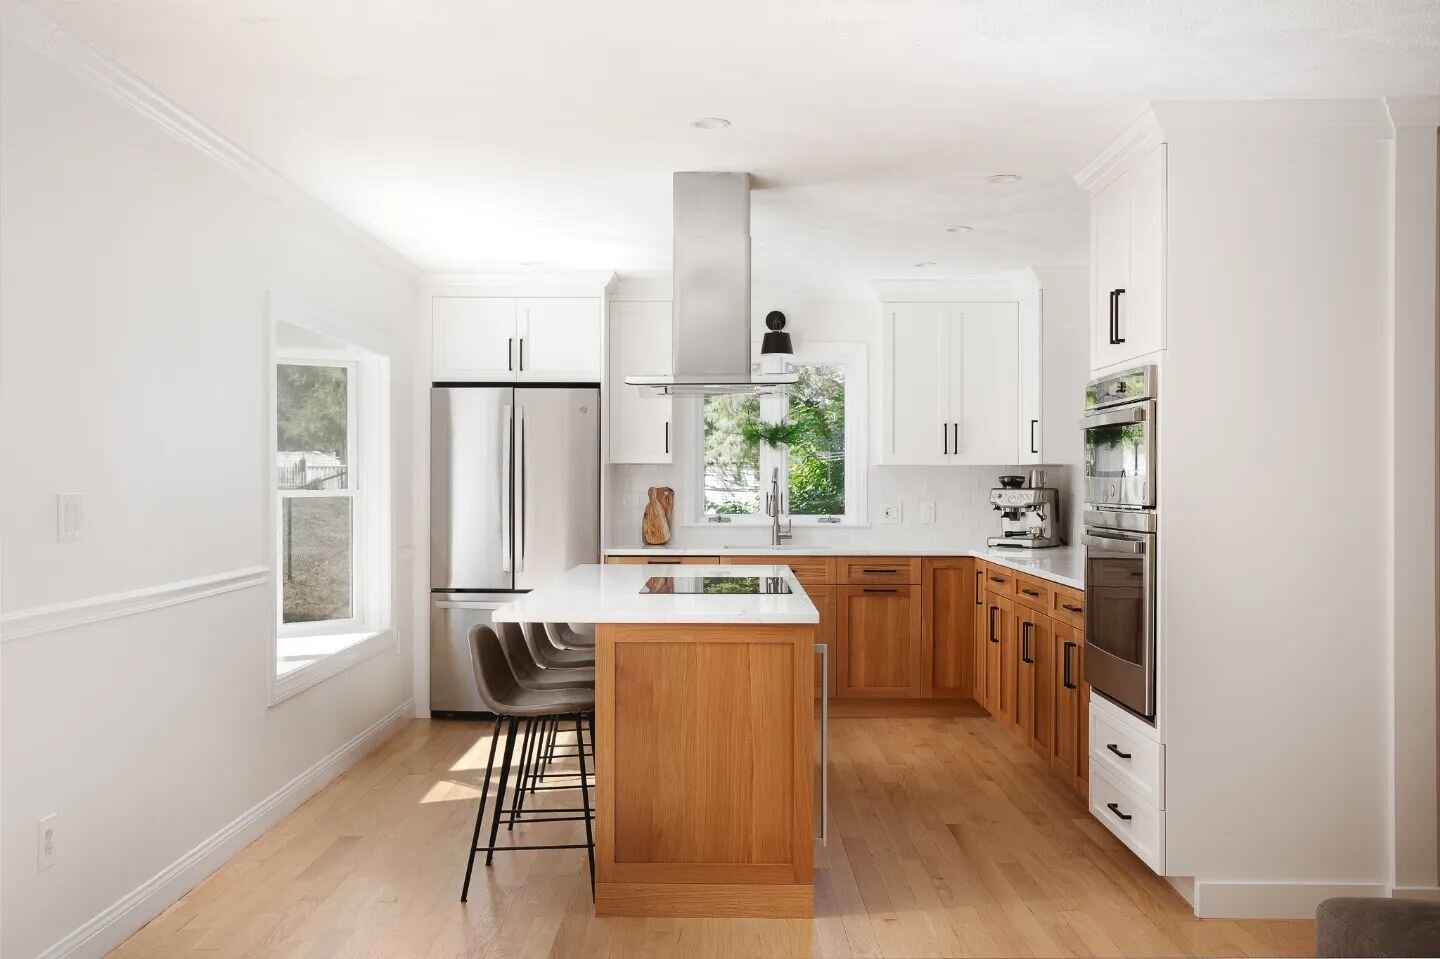 The lighting in this kitchen was *chef's kiss* 🤩 It was such a fun project fun to shoot. The natural wood and bright white combo makes for such an inviting, warm space. 

Cabinets: @russoskitchens 
Counters: @ecmarblegranite 
Backsplash: @nationalti